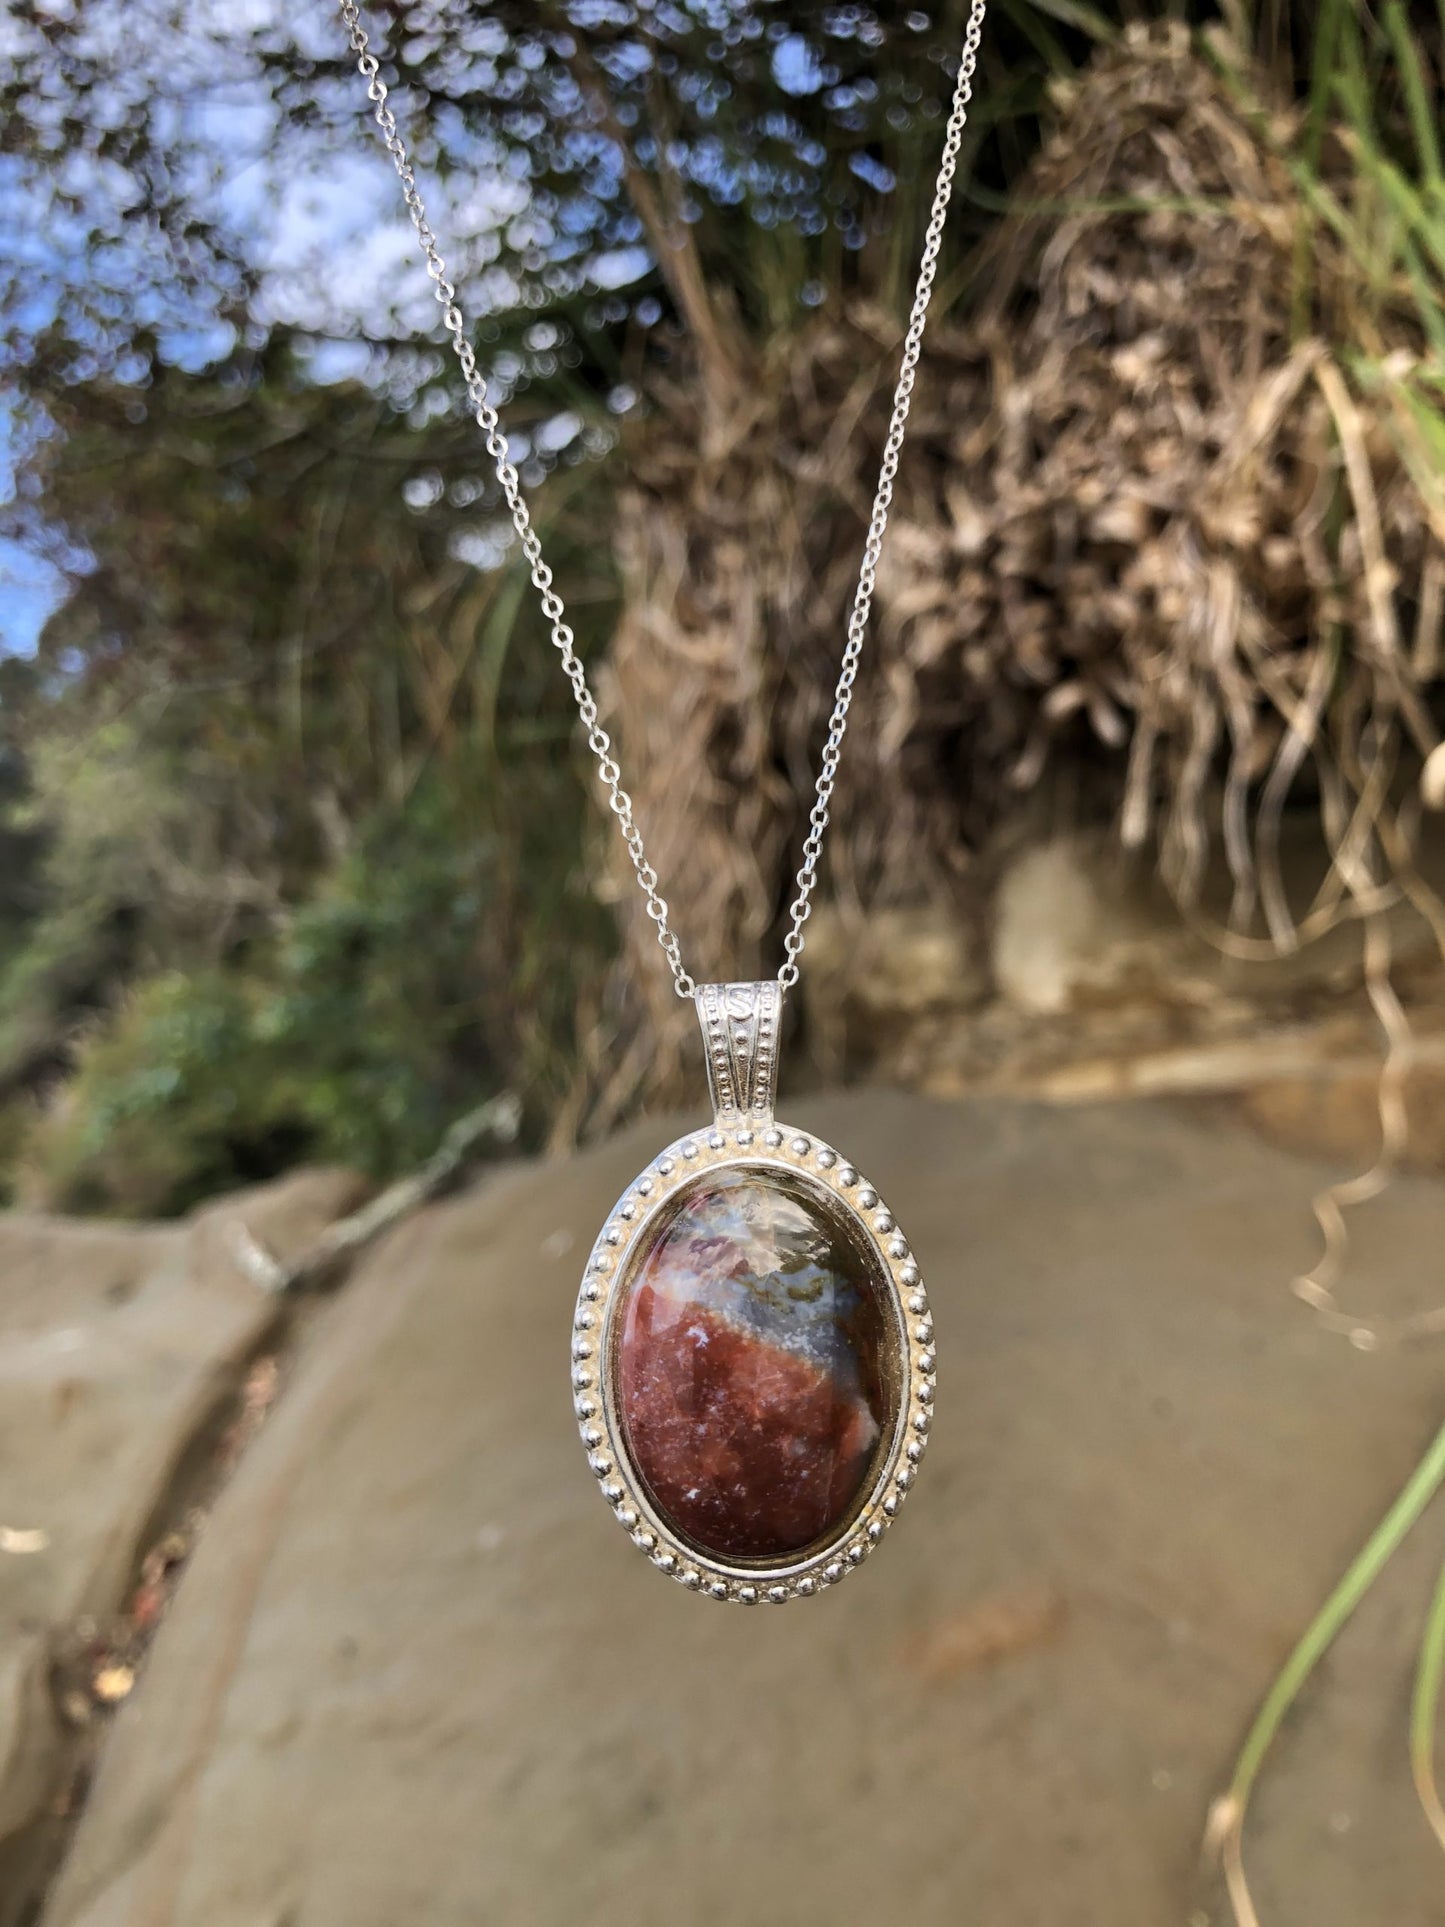 Necklace with a natural jasper-agate from the Hotoritori stream in the Kauranga valley with red, white and brown, hand polished to a 25x18mm cabochon and set in a silver plated setting with 19 inch chain, on beach